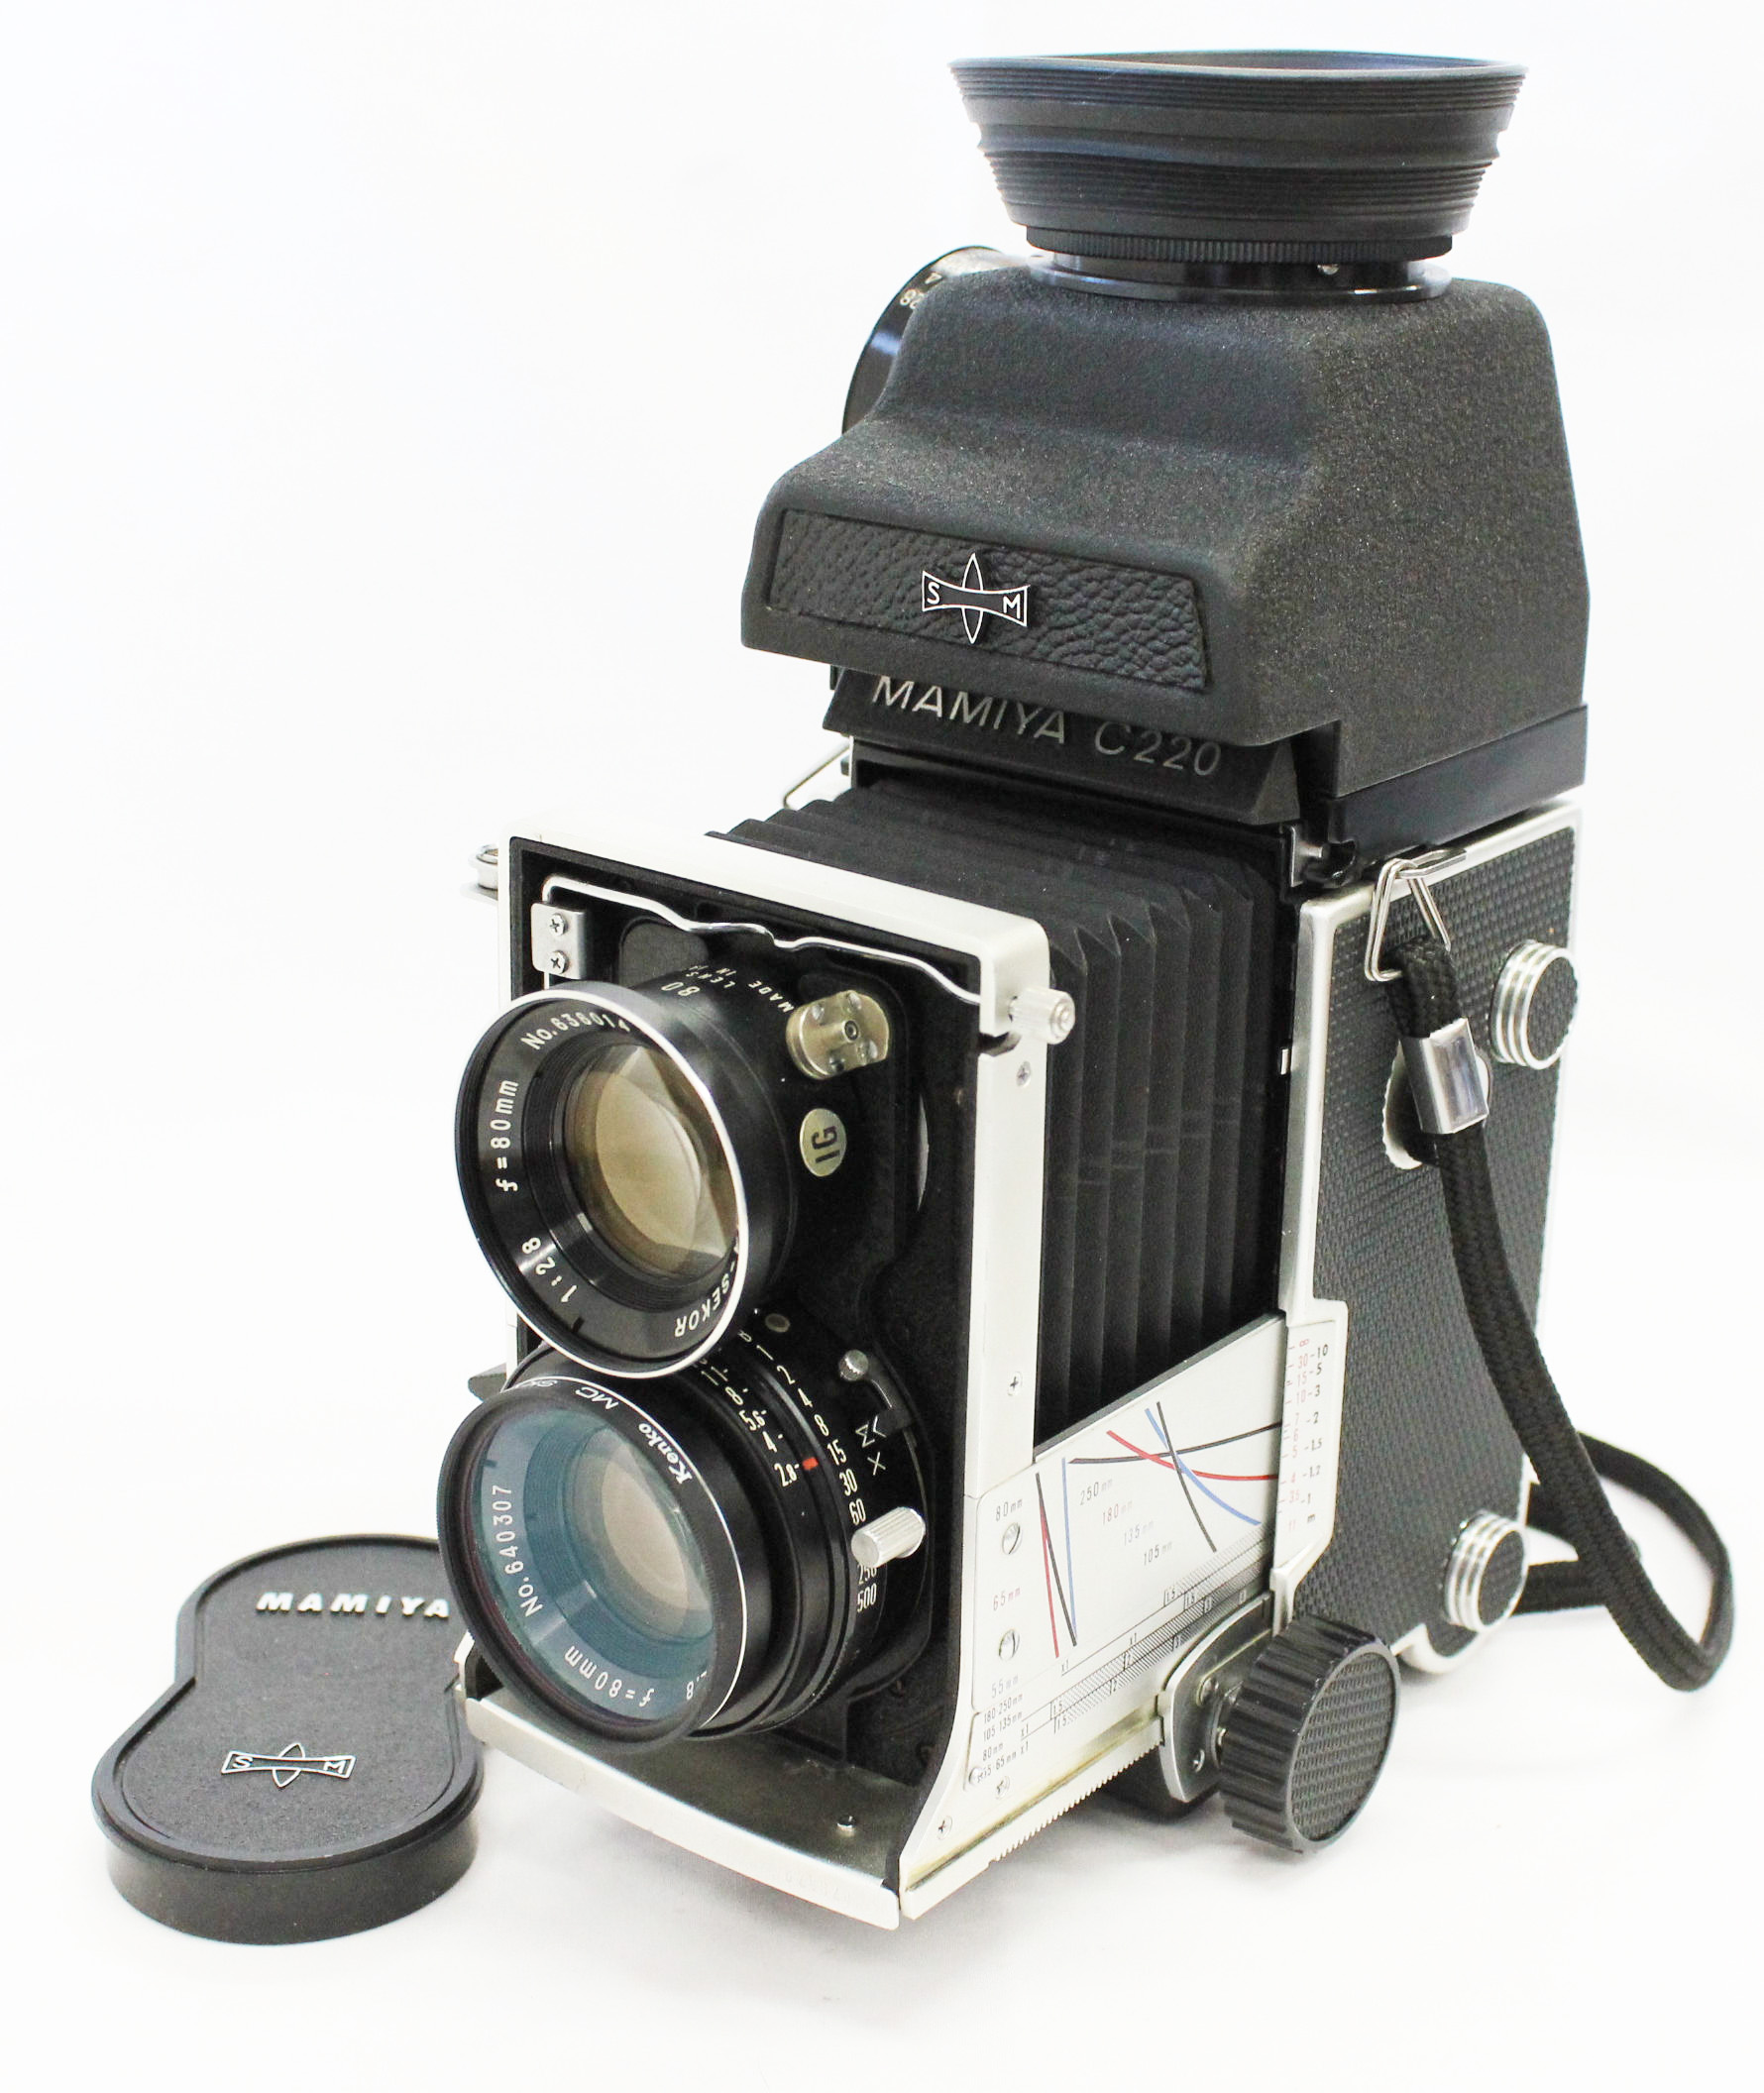 [Exc5] Mamiya C220 Pro TLR Medium Format Camera with 80mm F2.8 and CdS Magnifying Hood from Japan